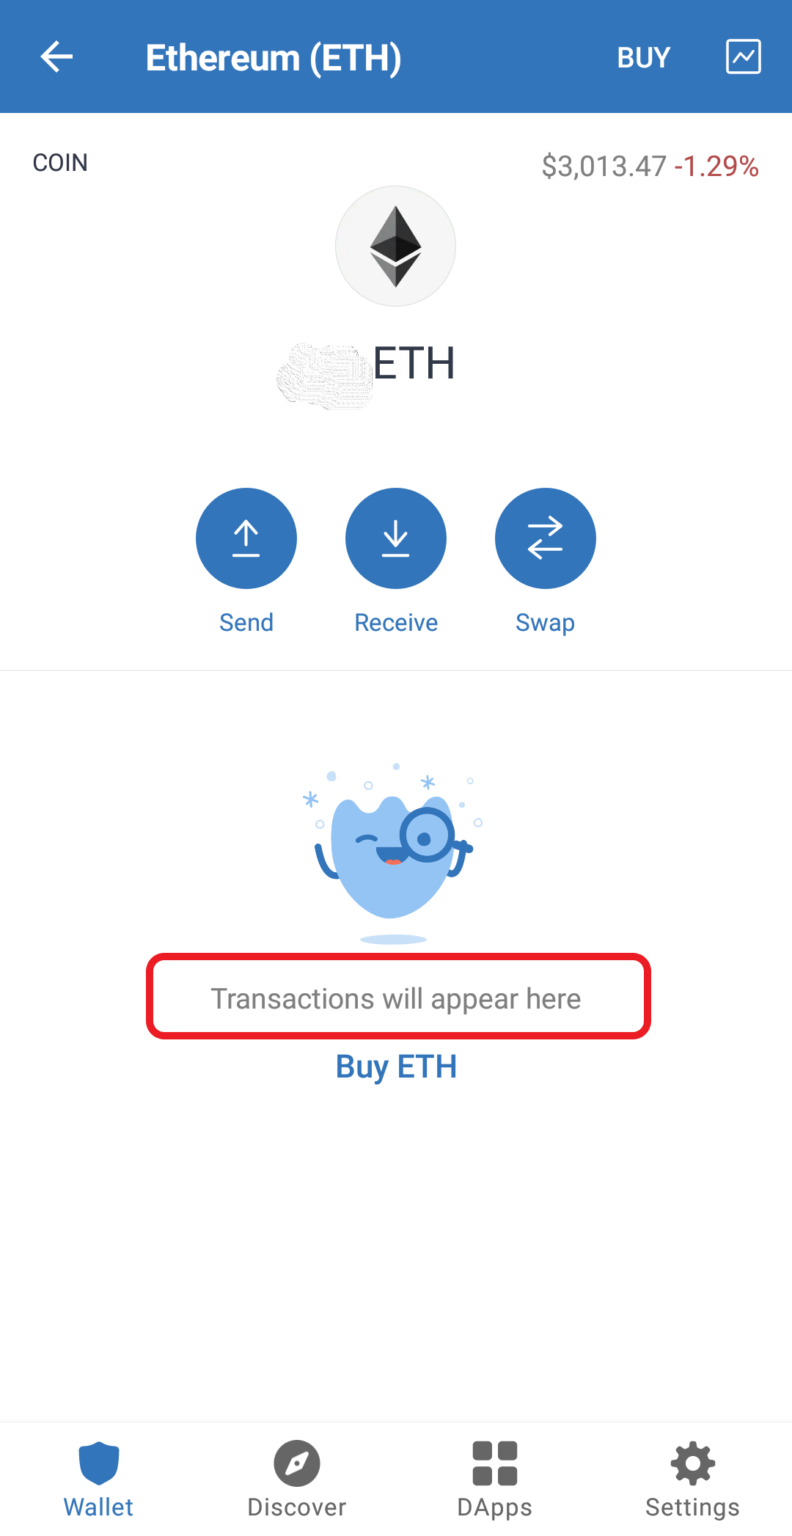 can i send crypto from crypto.com to trust wallet